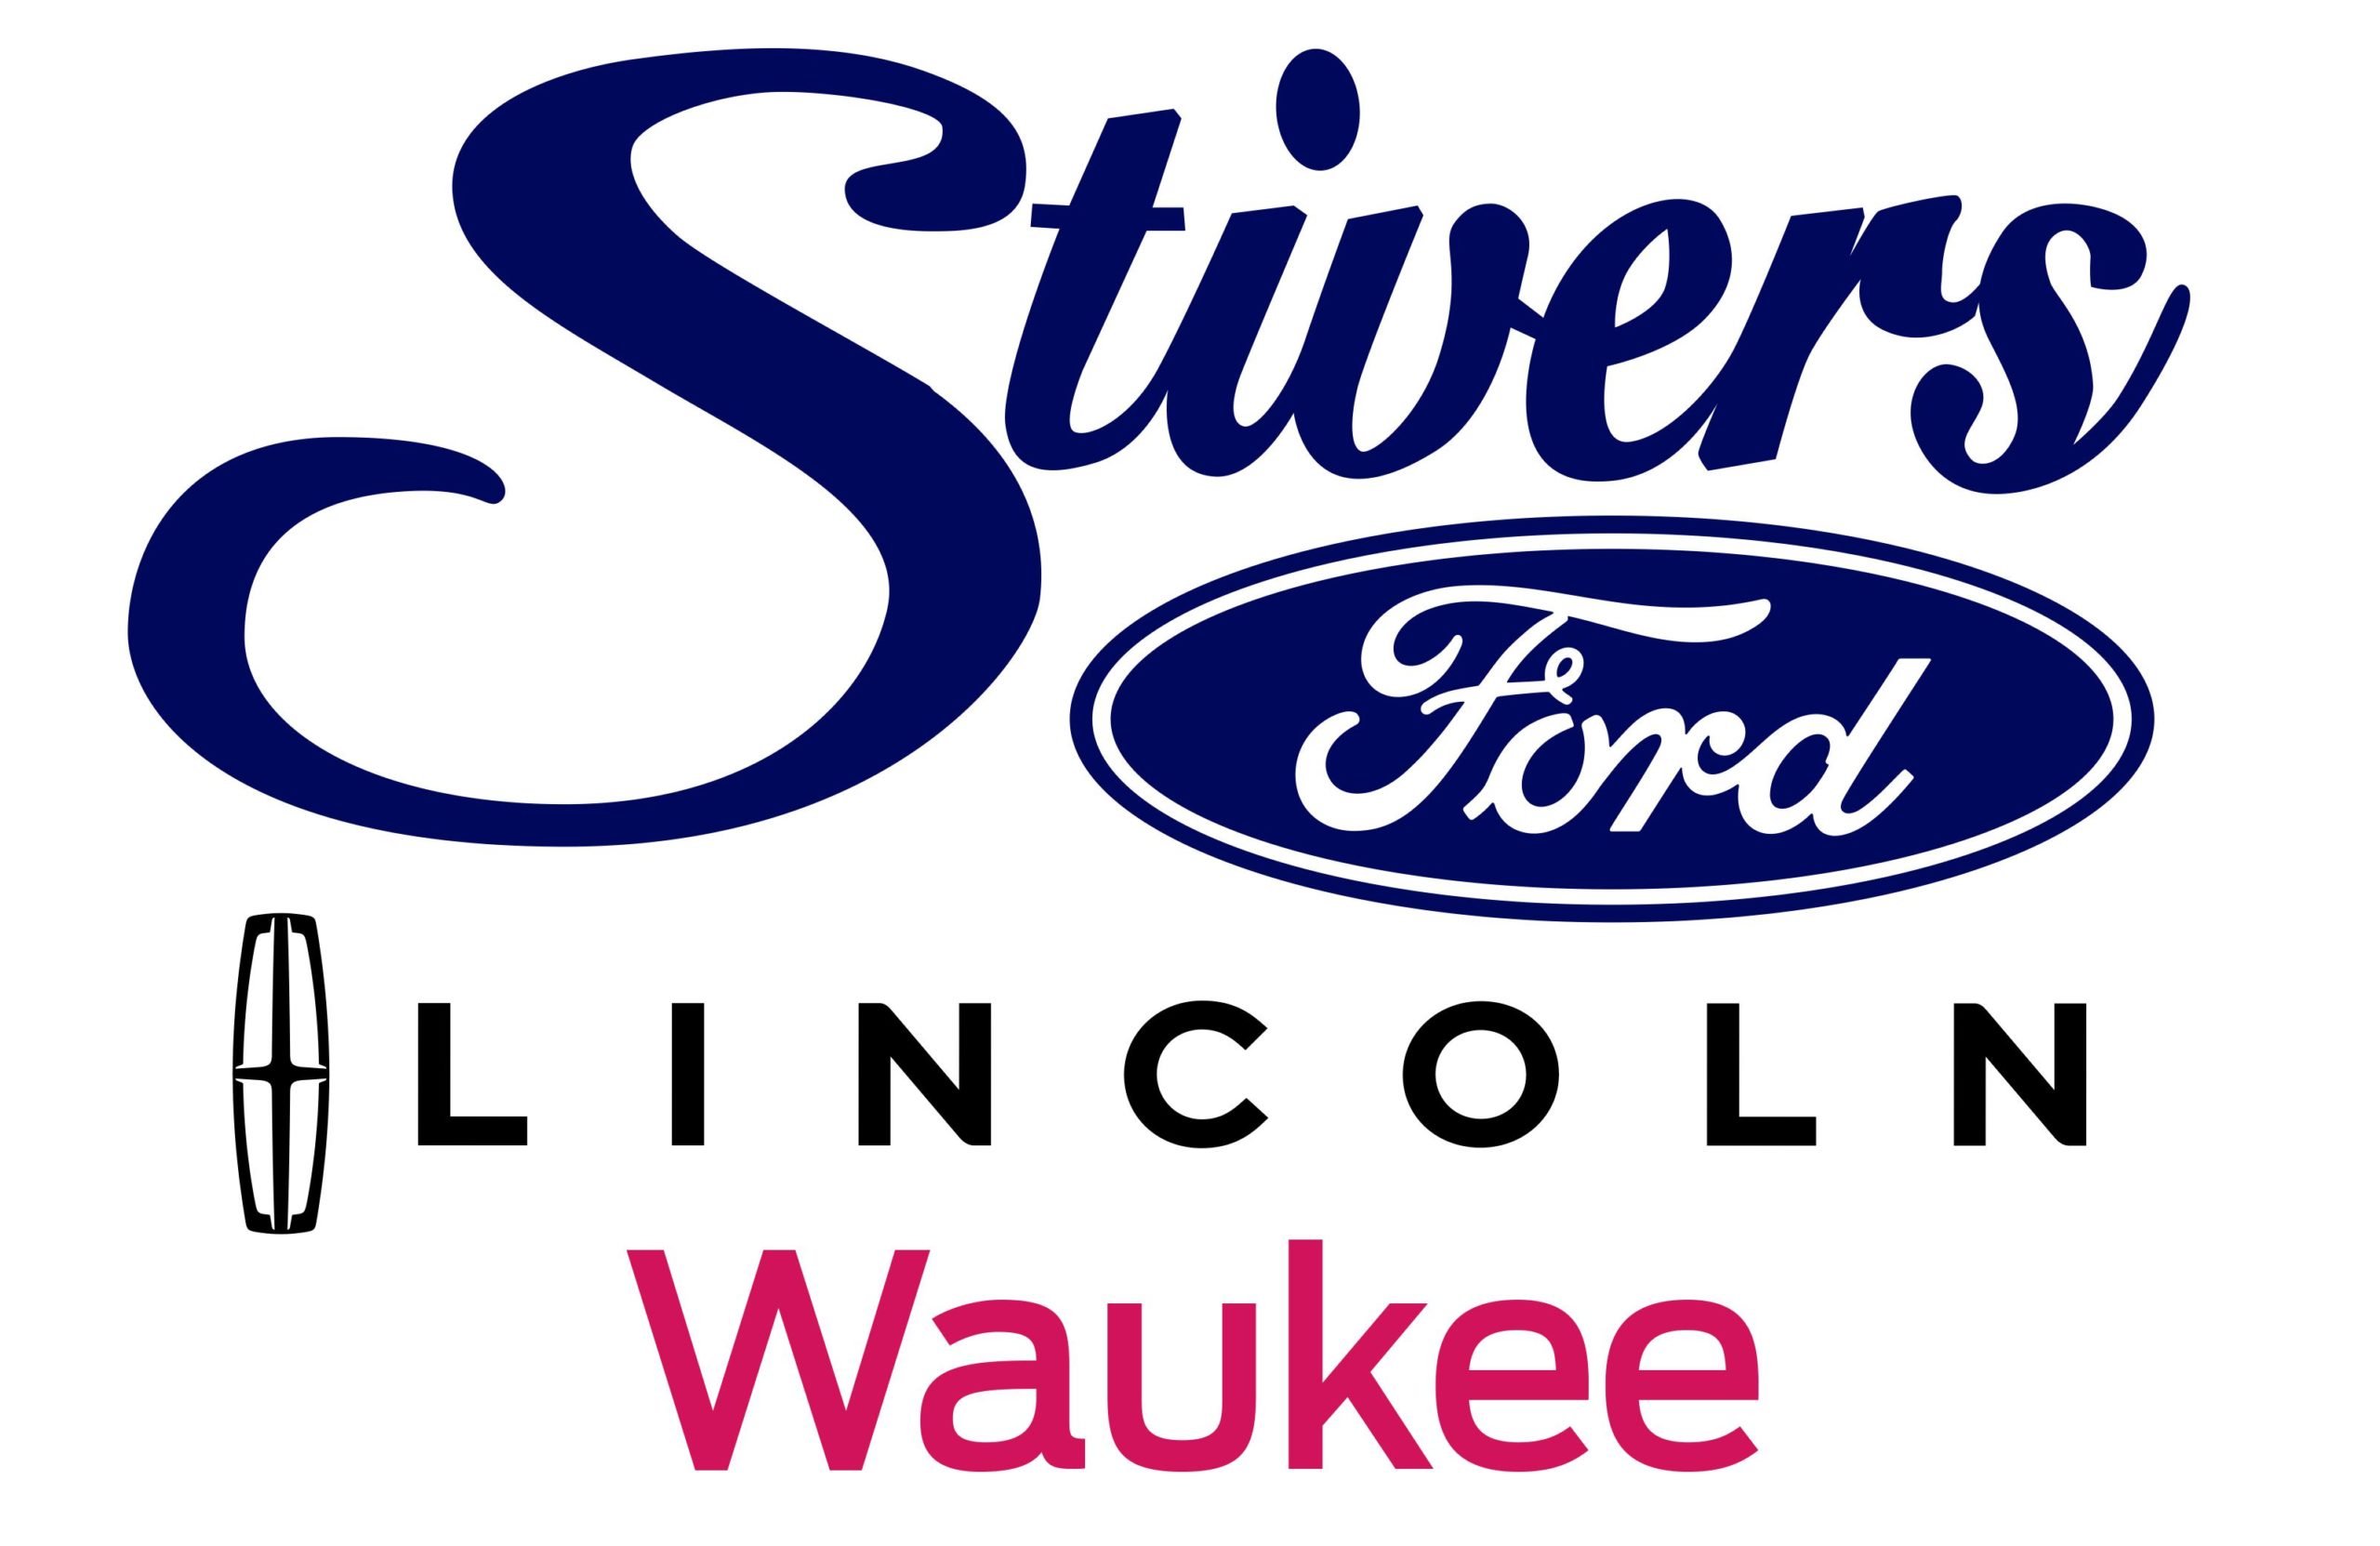 Stivers Ford/Lincoln Car Dealer in Waukee